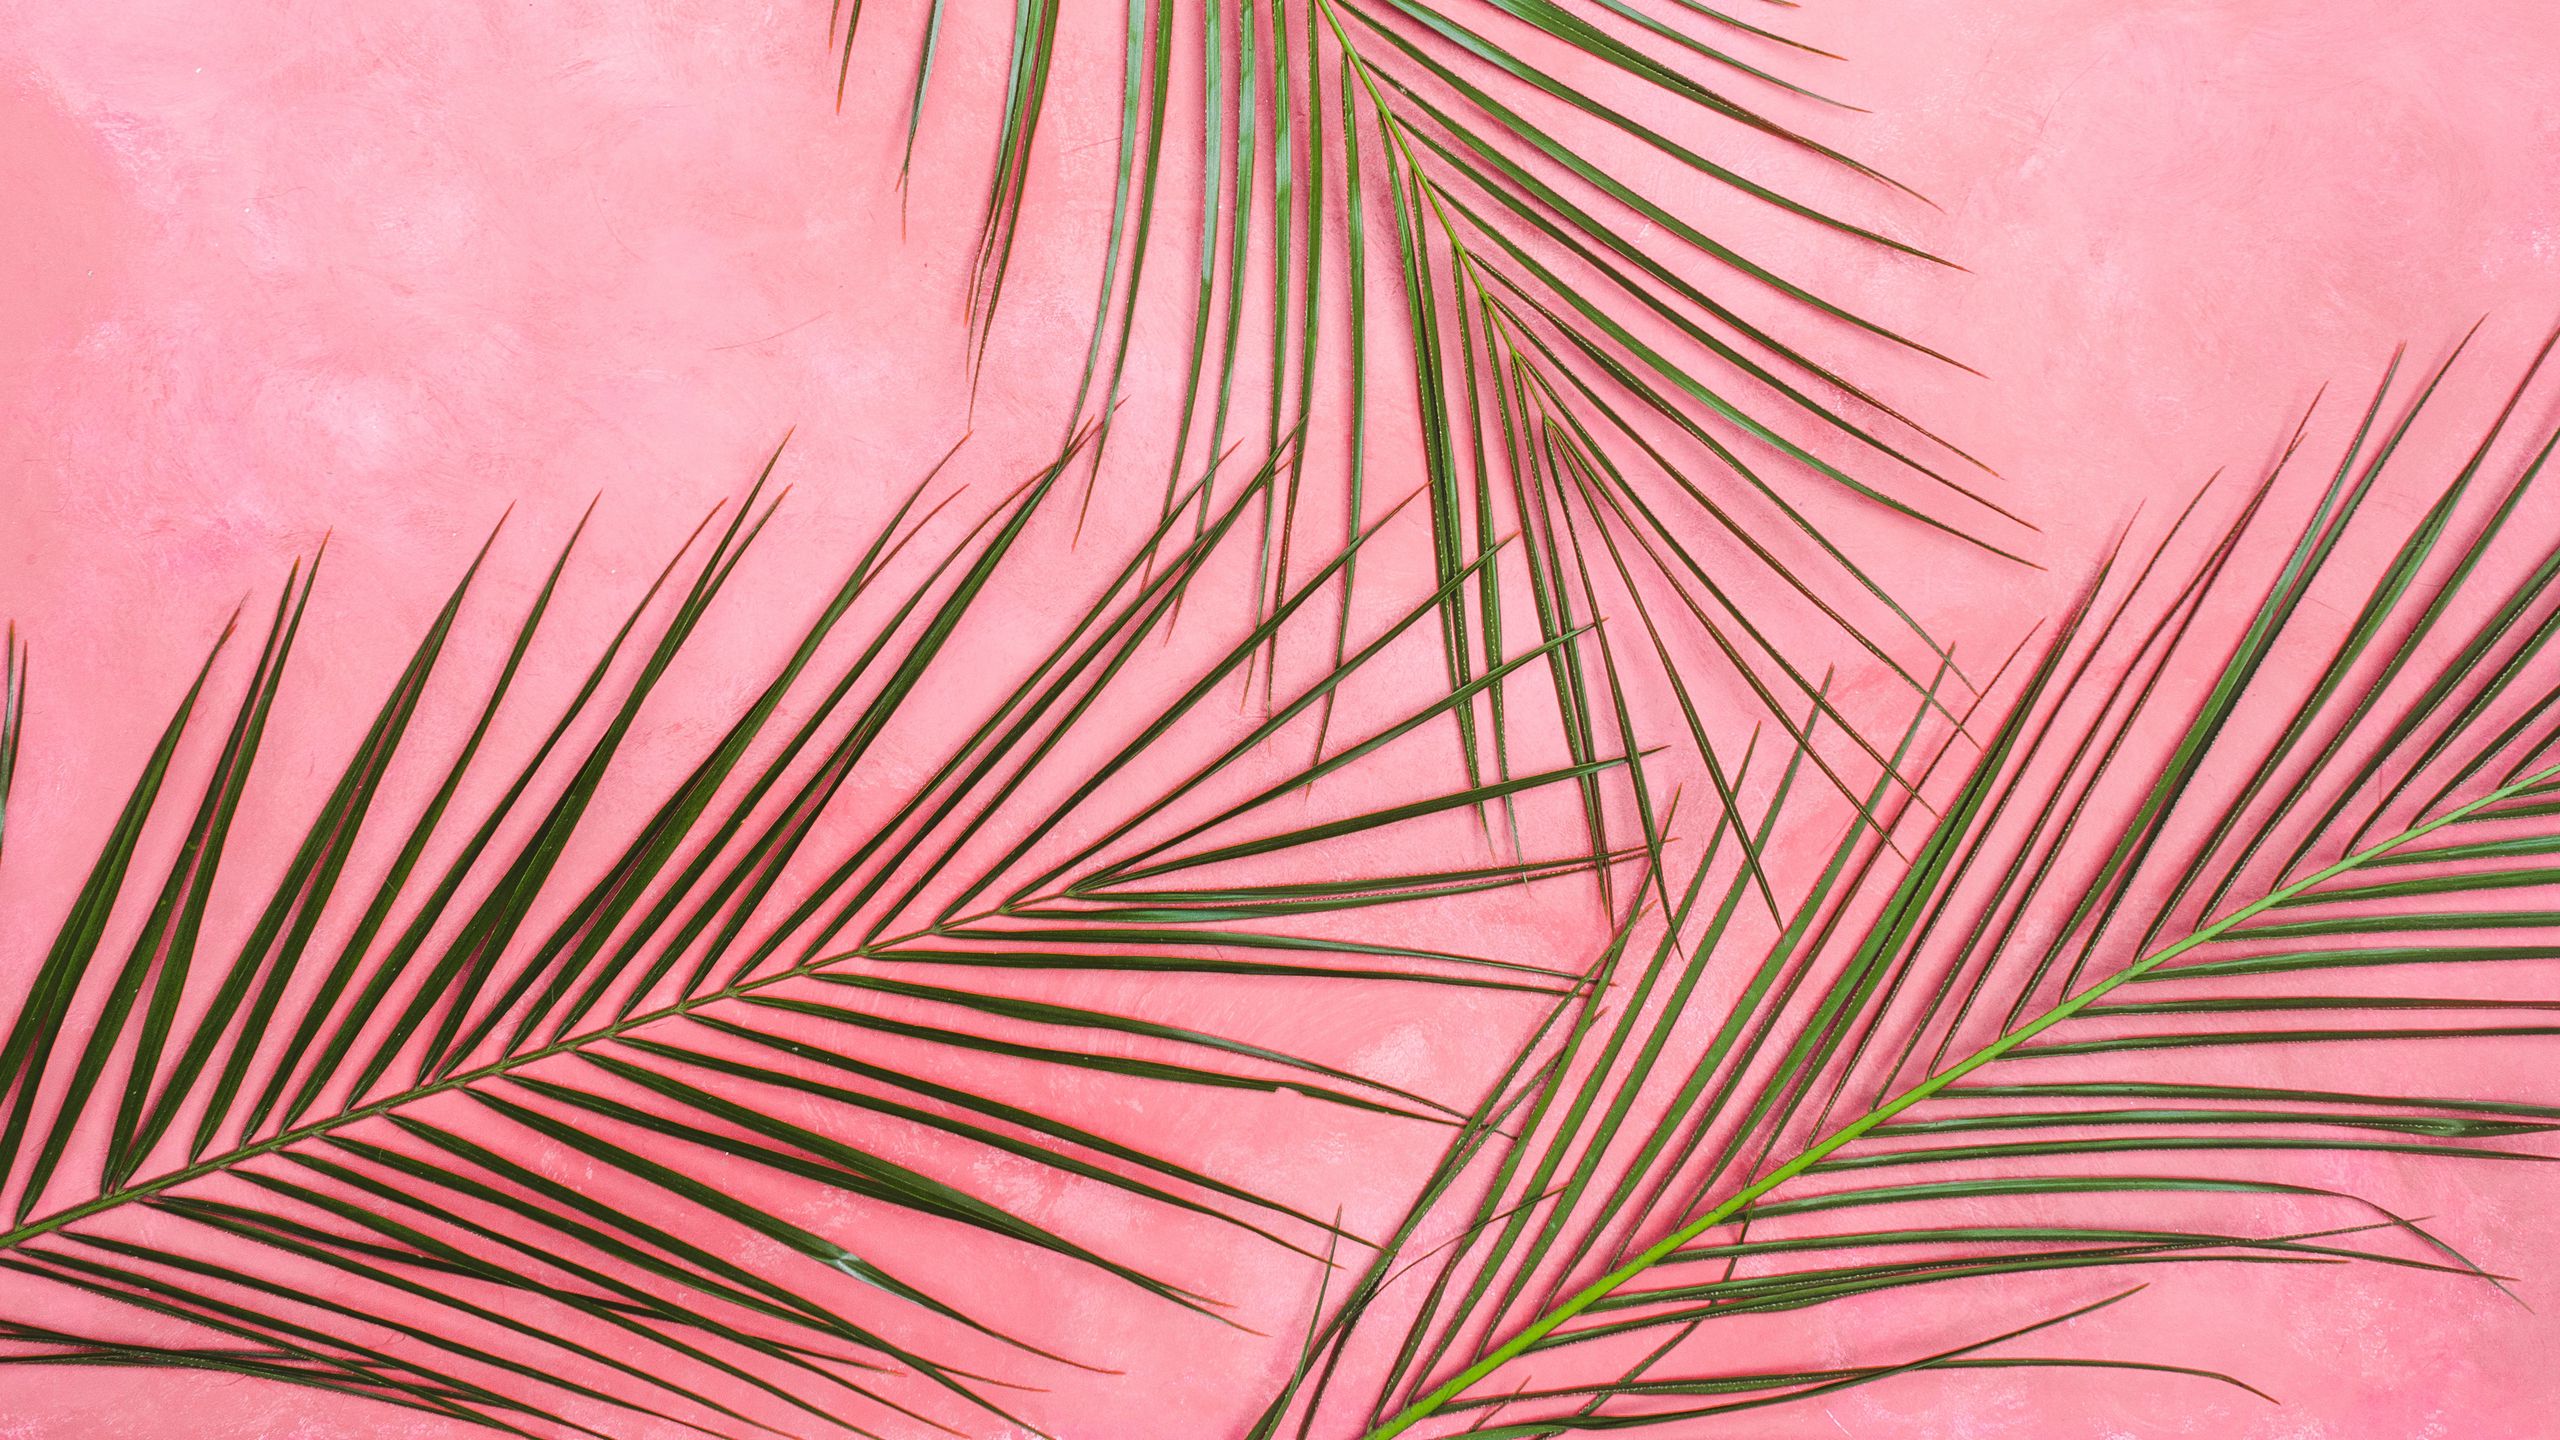 Download wallpaper 2560x1440 palm tree, branches, pastel, leaves,  minimalism widescreen 16:9 hd background